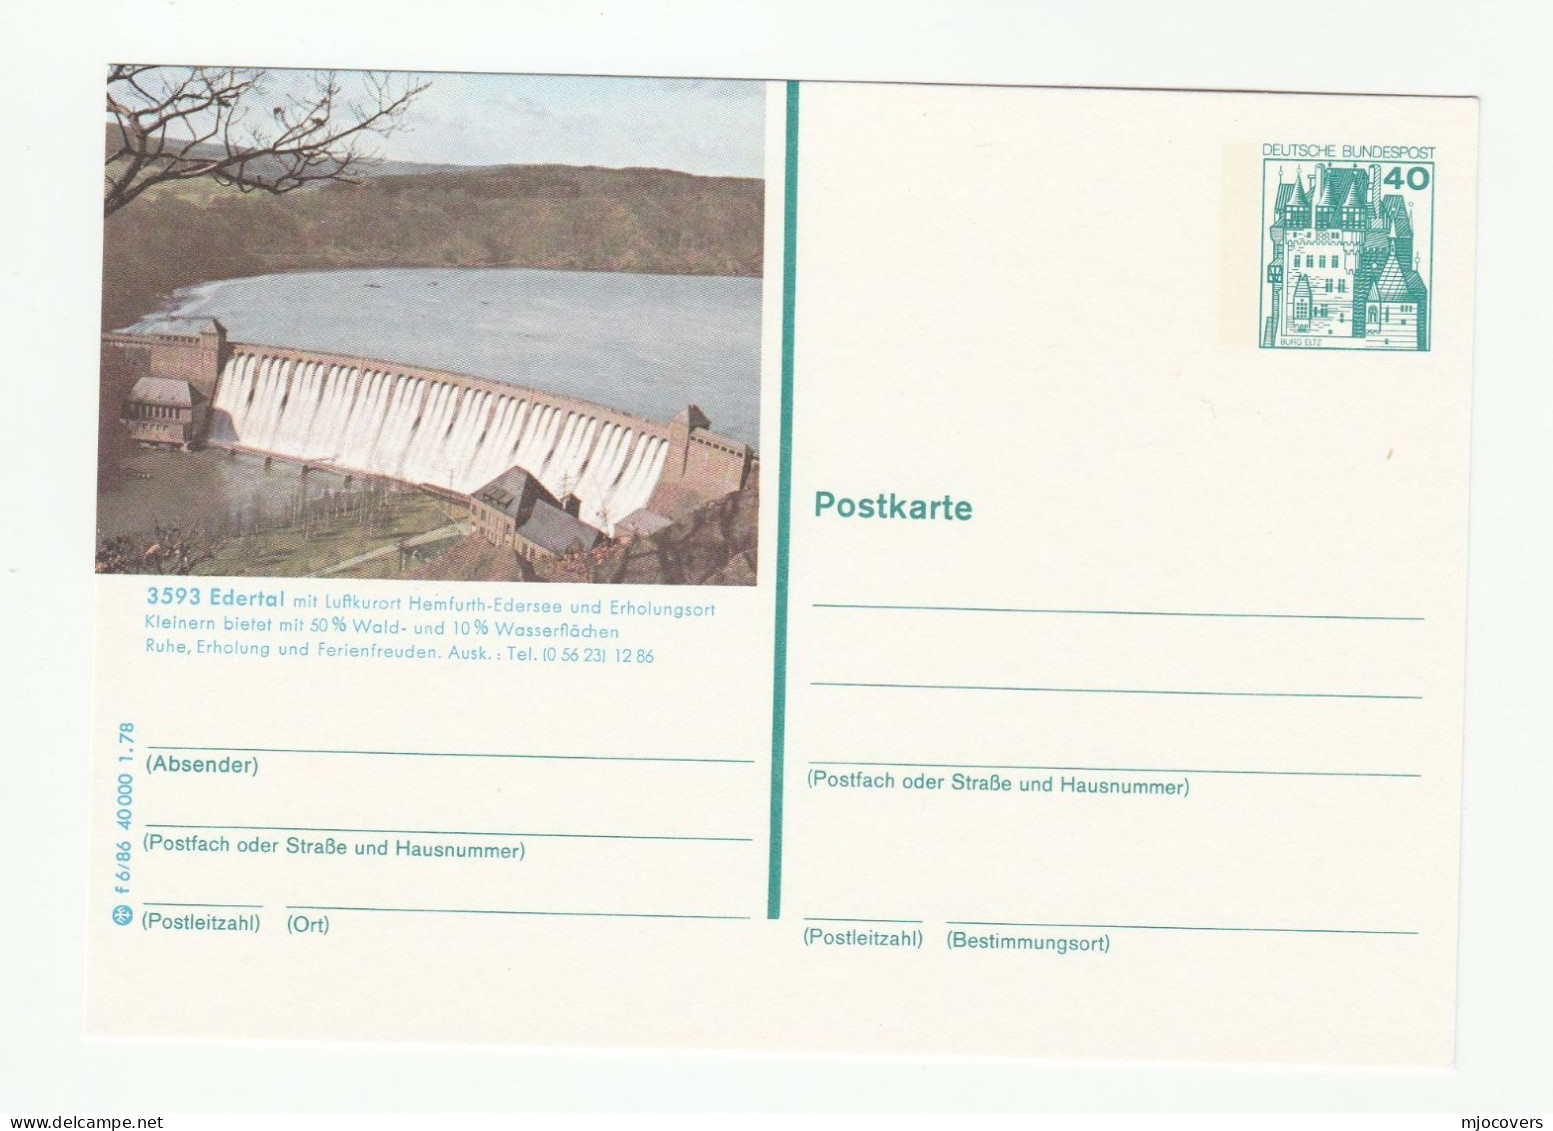 Edertal HYDROELECTRIC DAM Postal STATIONERY Card  1978 Germany Cover Electricity Energy Hydro Water - Agua